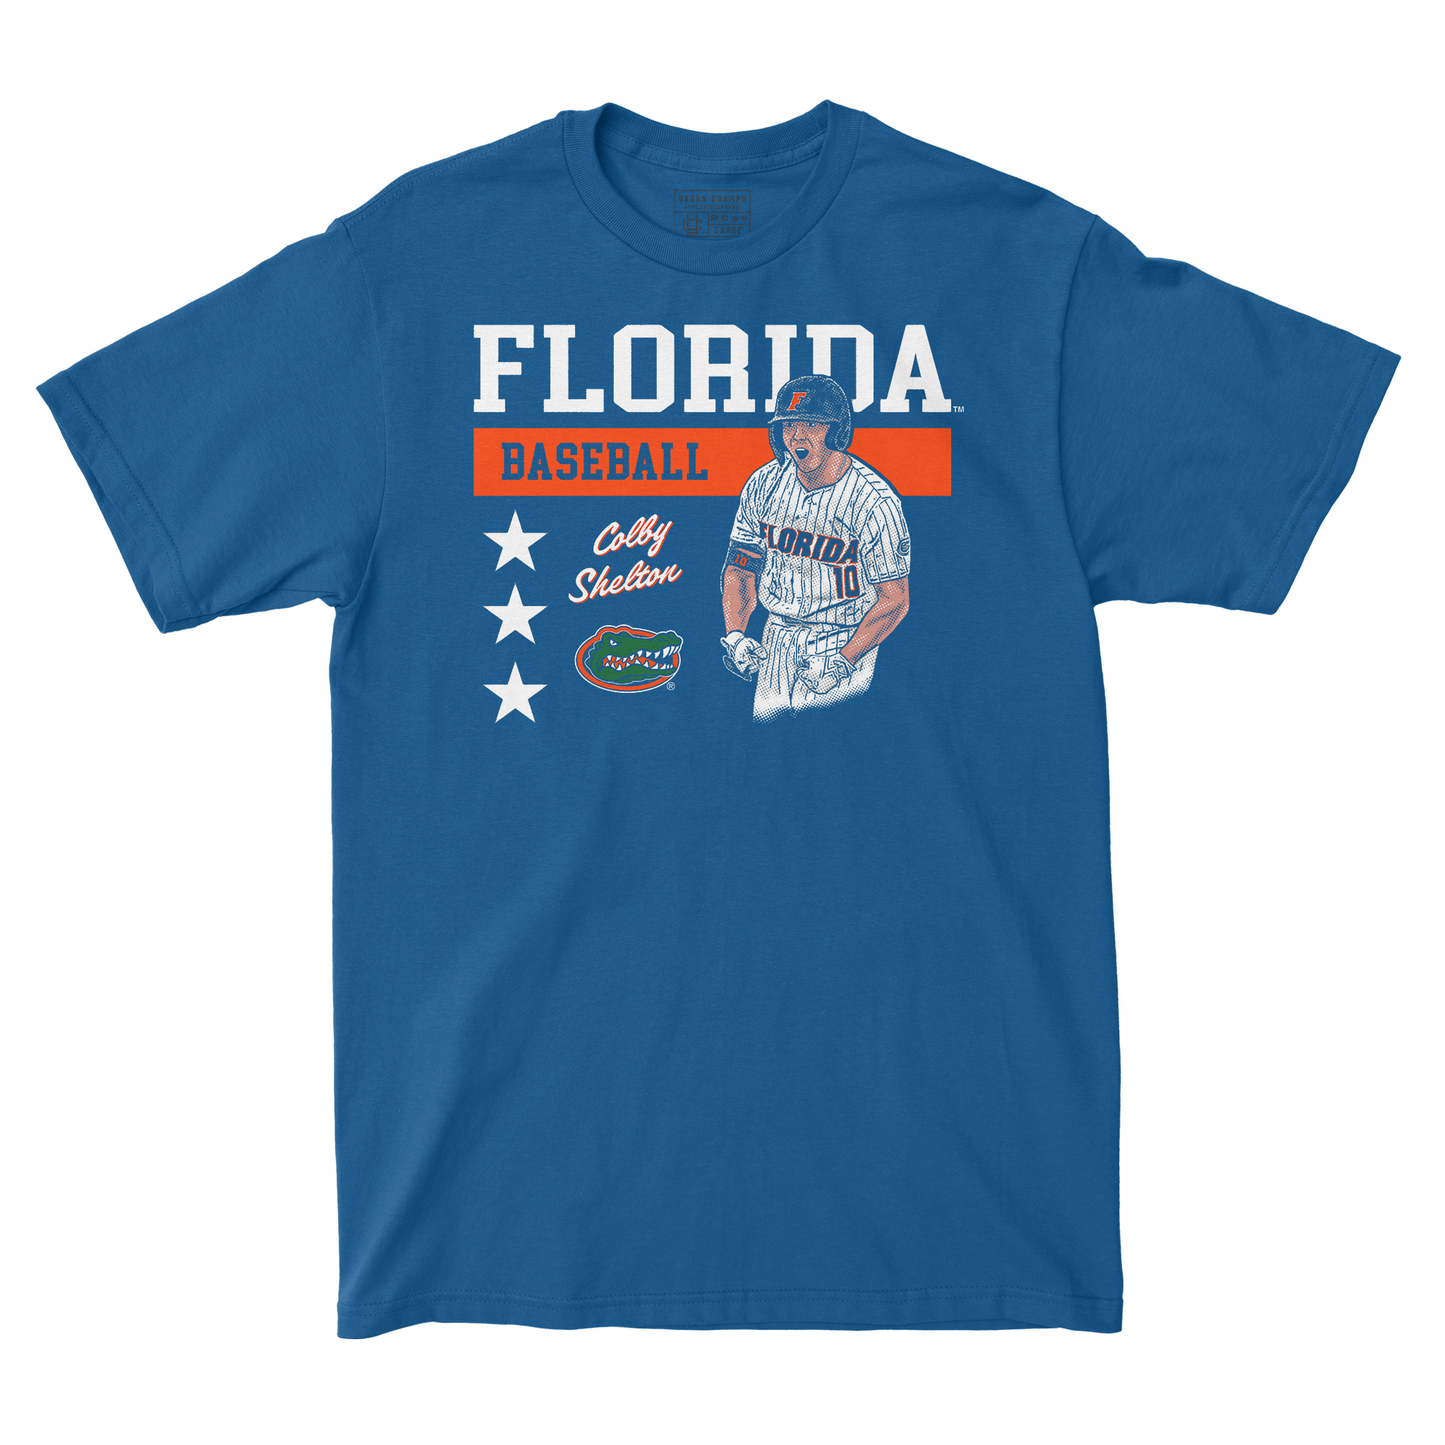 EXCLUSIVE RELEASE: Colby Shelton Cartoon Blue Tee